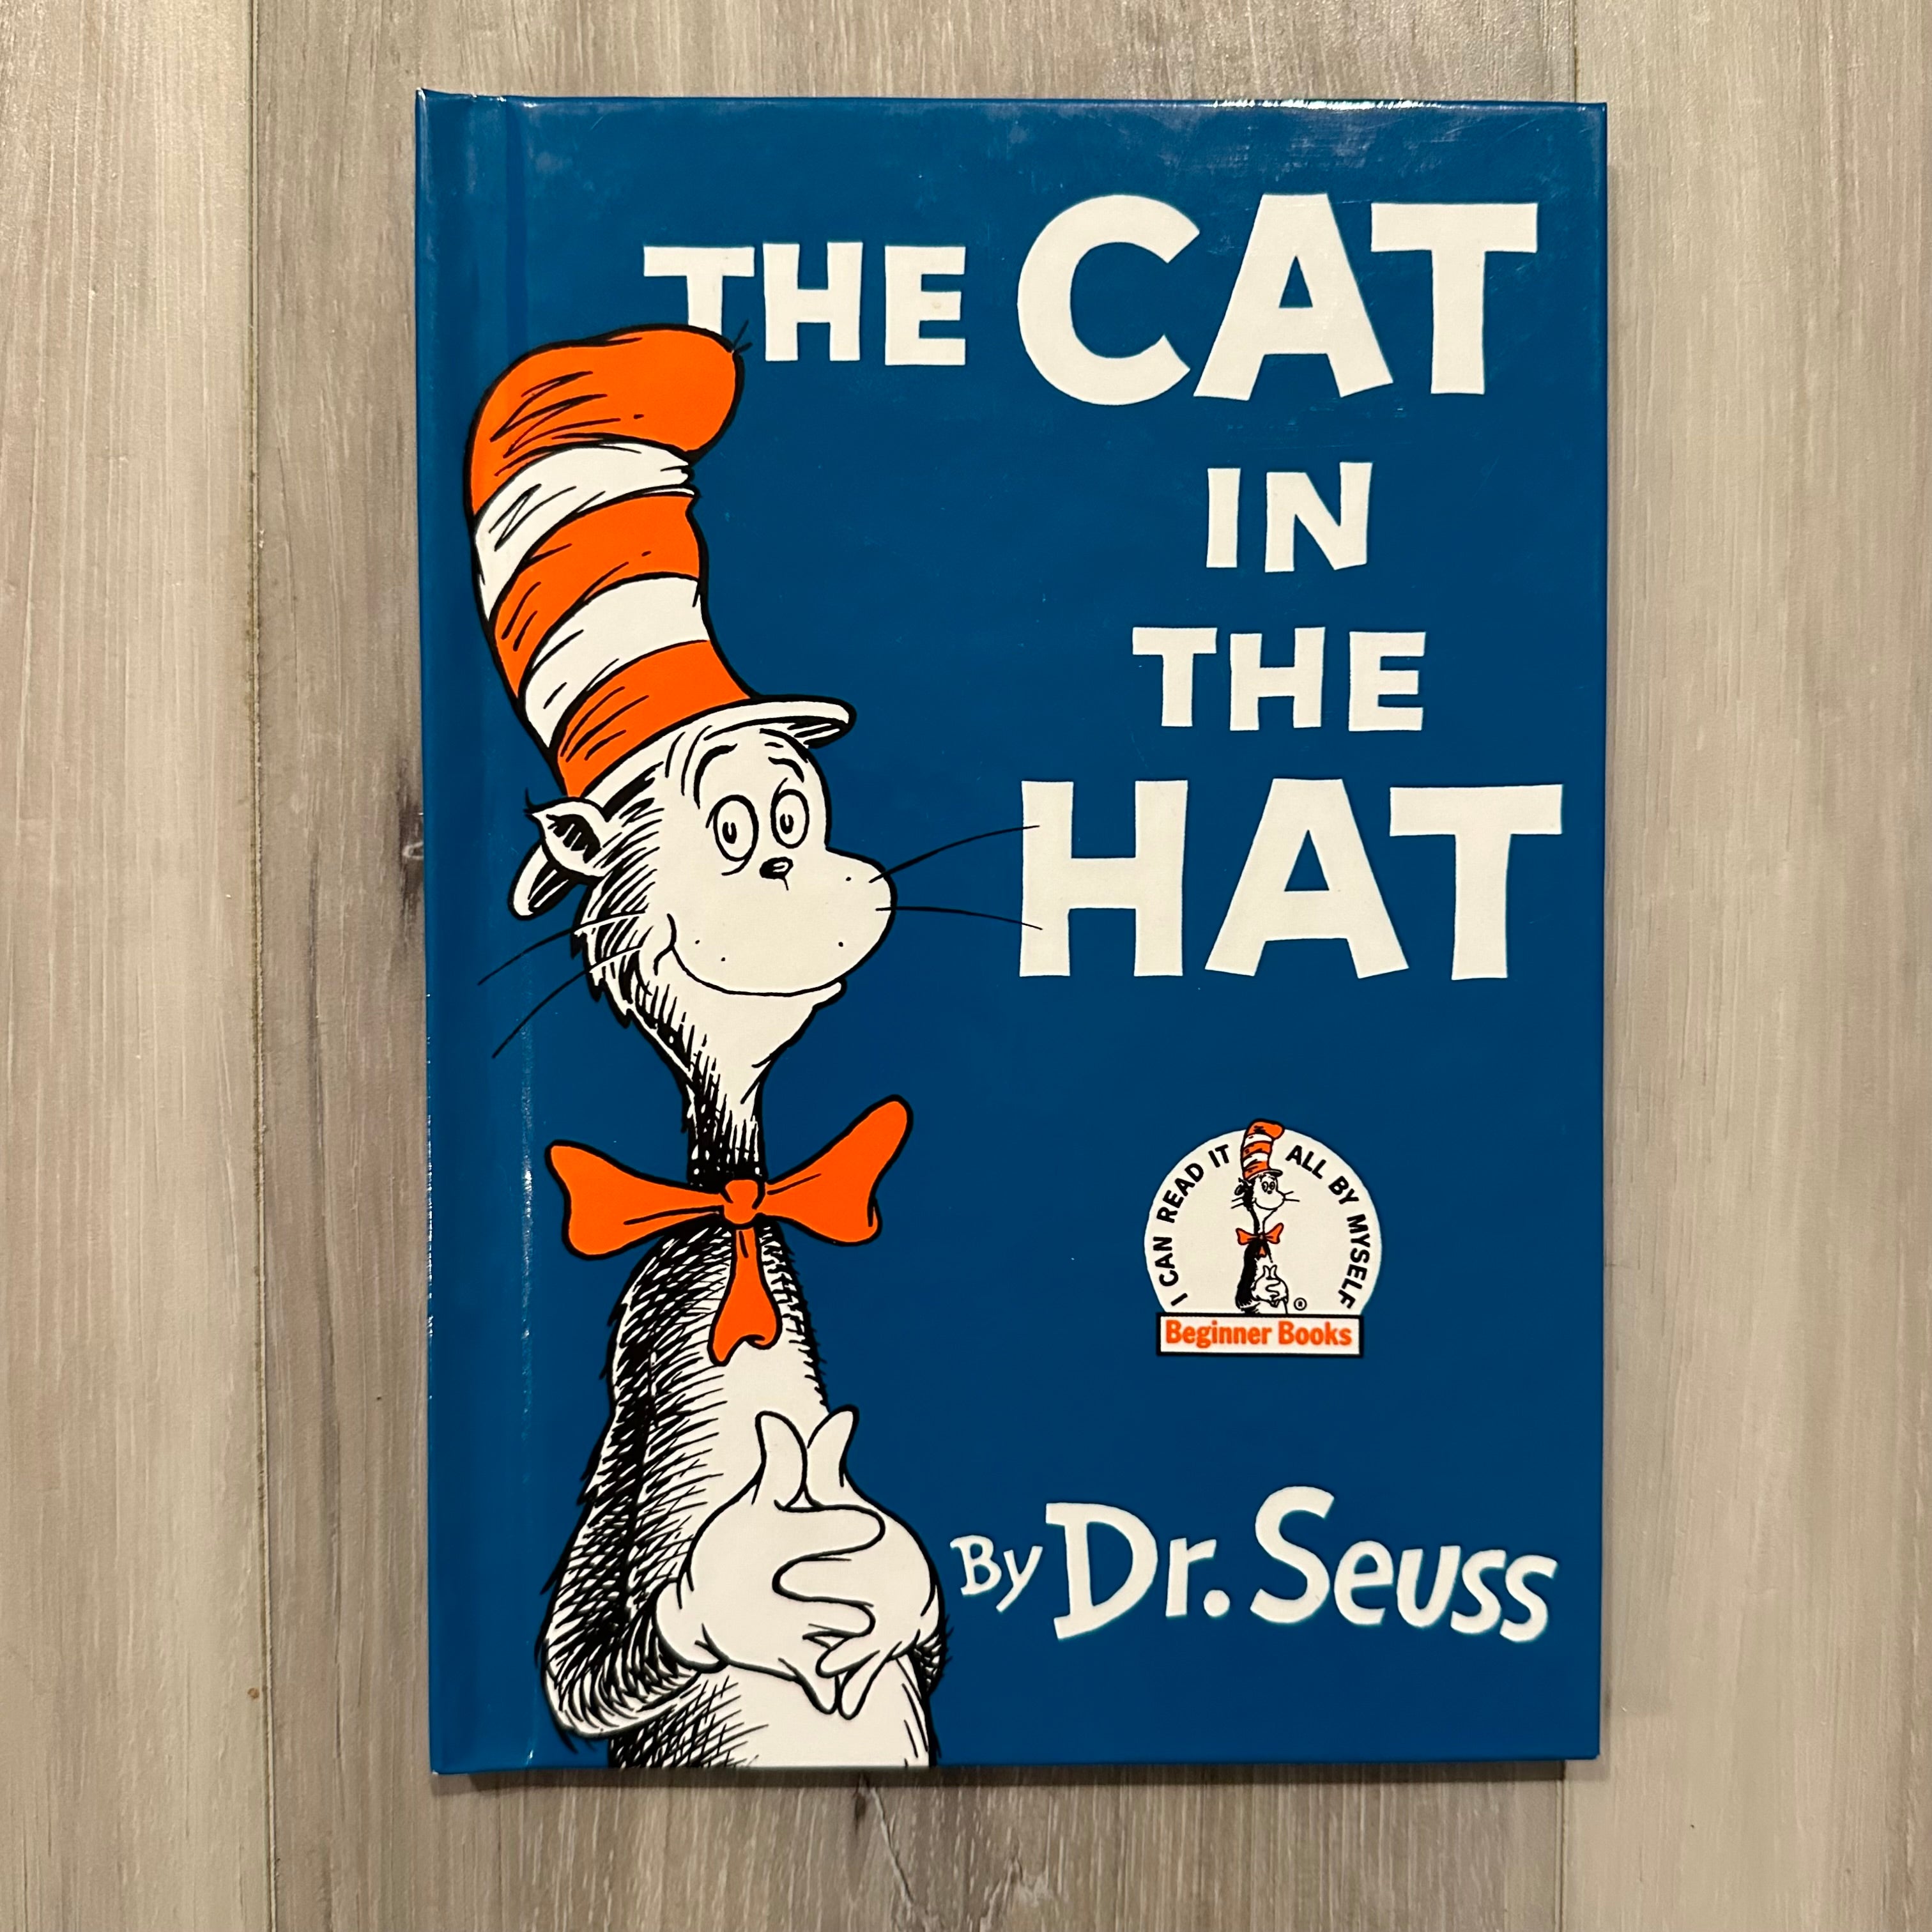 Dr. Seuss Books-Mr. Brown Can Moo Can You & The Cat in the Hat